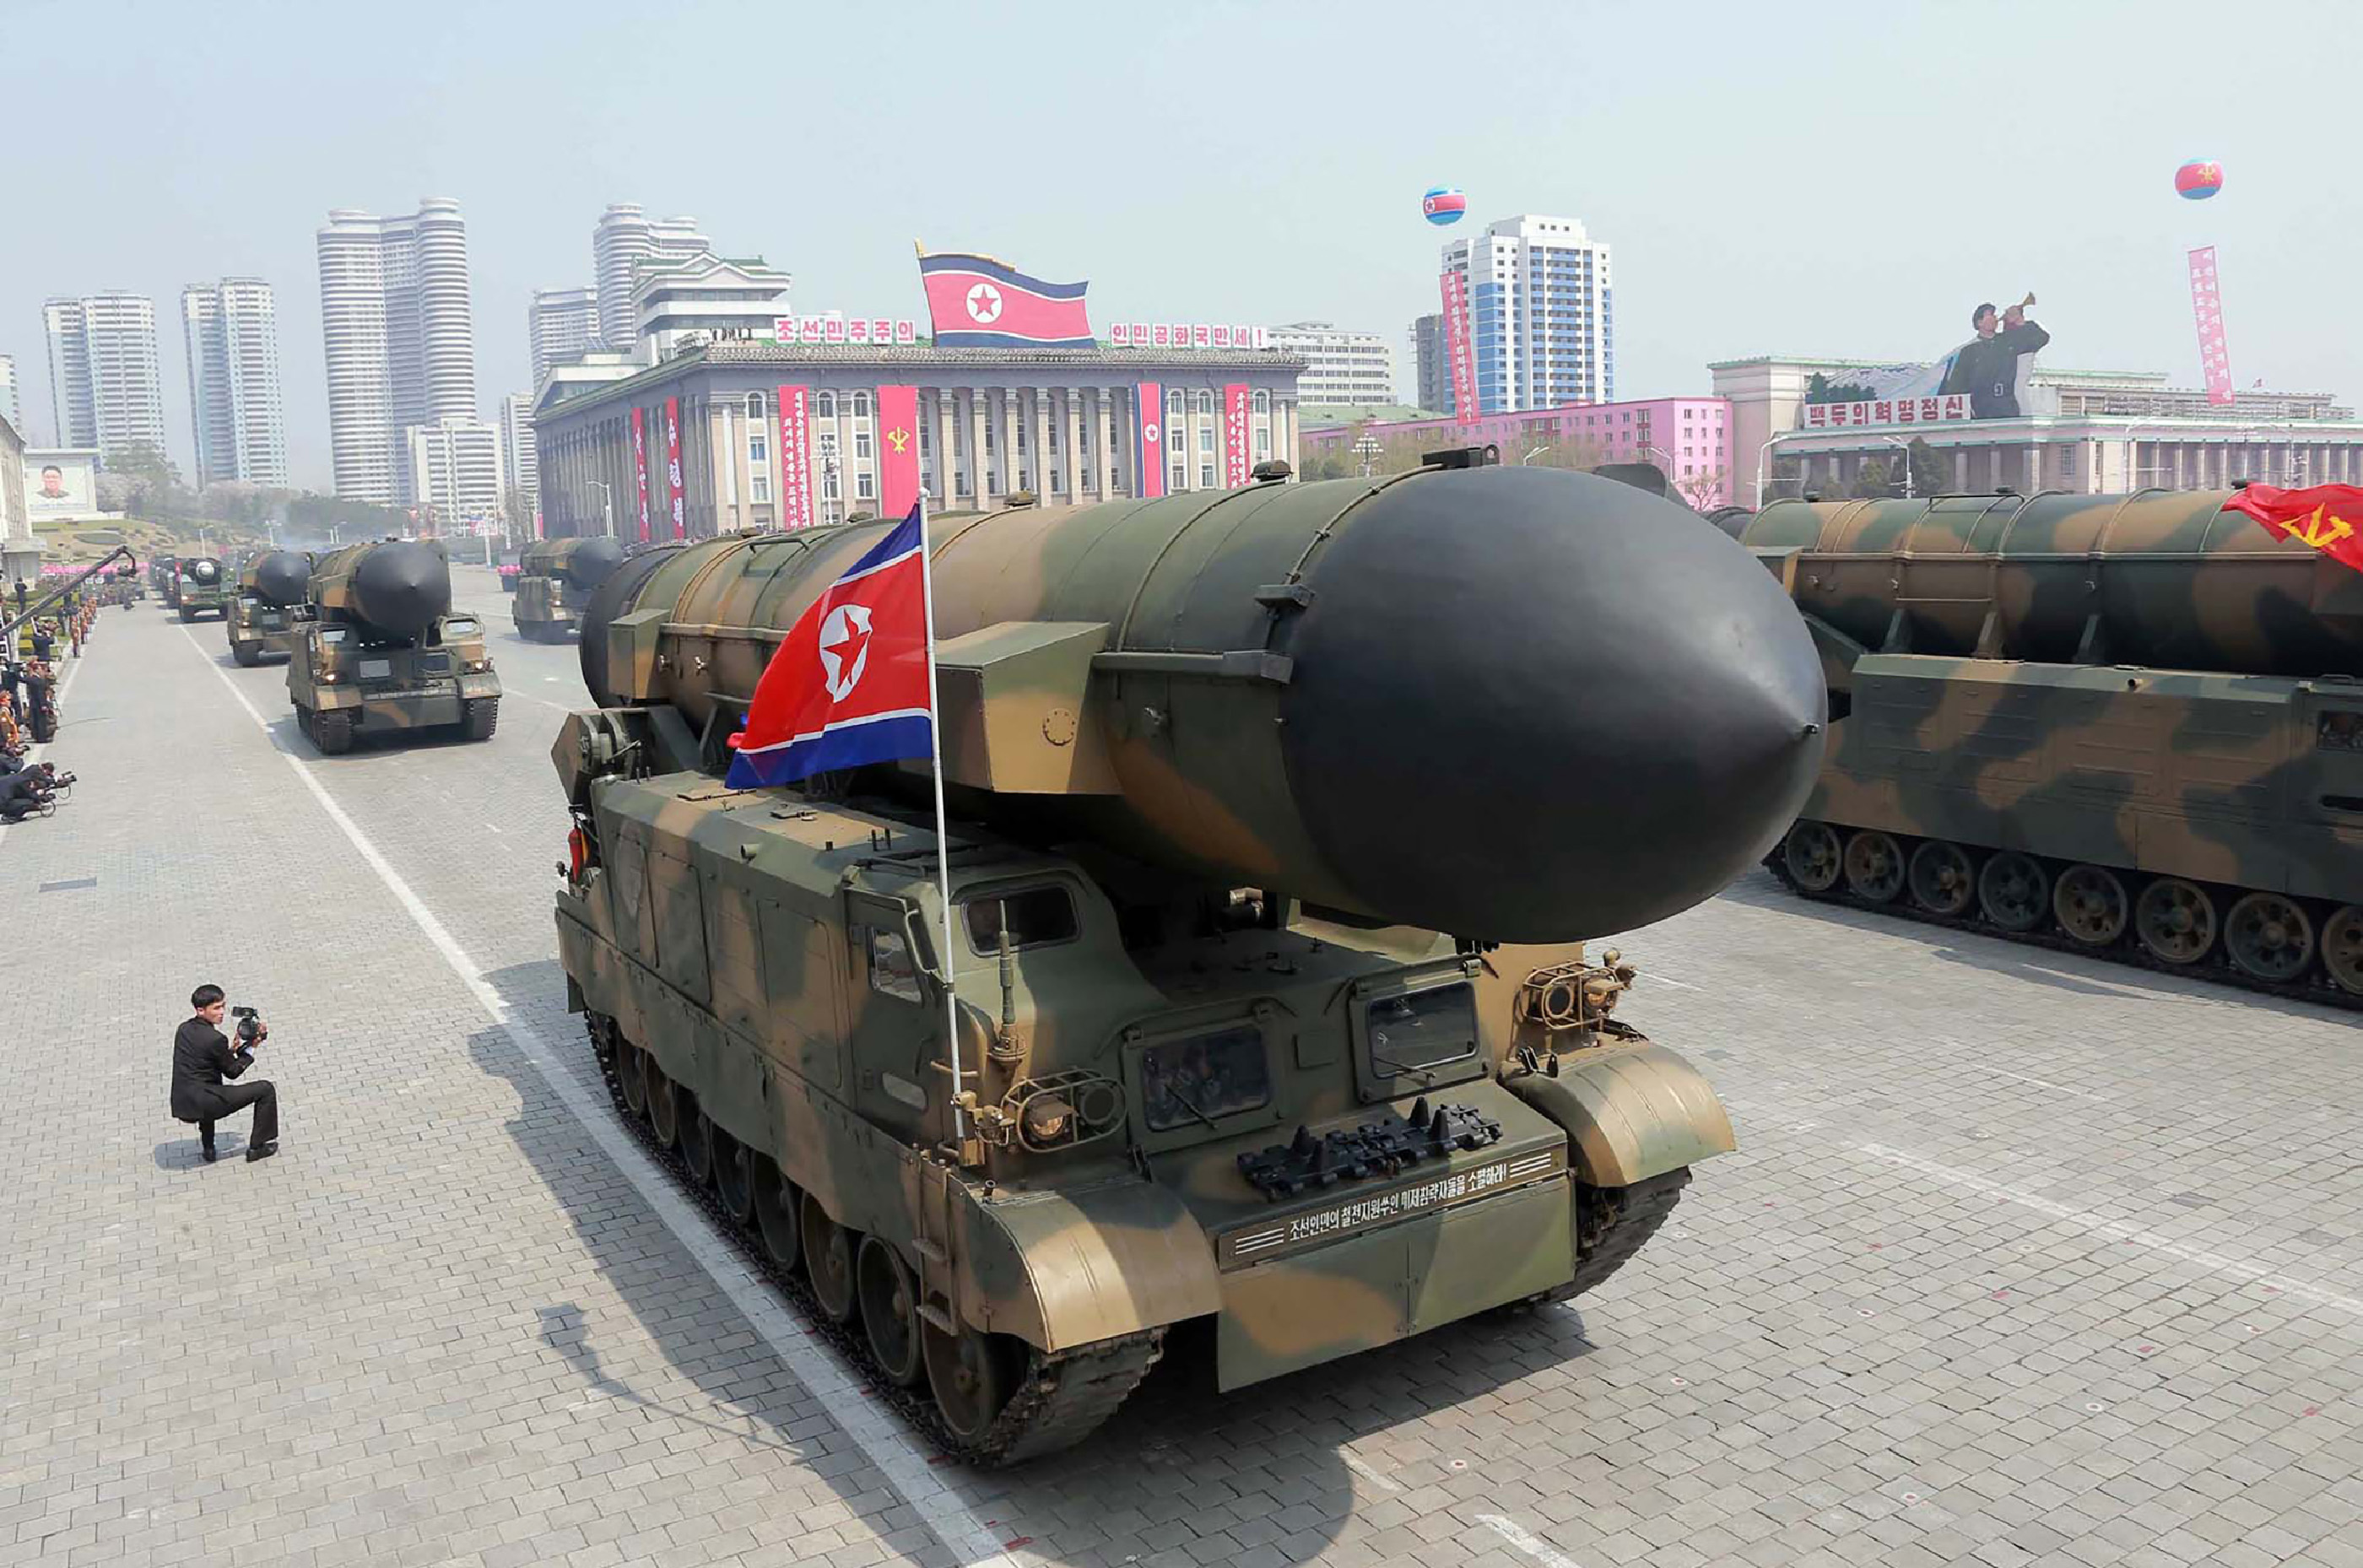 This April 15, 2017 picture released from North Korea's official Korean Central News Agency (KCNA) on April 16, 2017 shows Korean People's ballistic missiles being displayed through Kim Il-Sung square during a military parade in Pyongyang marking the 105th anniversary of the birth of late North Korean leader Kim Il-Sung. / AFP PHOTO / KCNA VIA KNS / STR / South Korea OUT / REPUBLIC OF KOREA OUT ---EDITORS NOTE--- RESTRICTED TO EDITORIAL USE - MANDATORY CREDIT "AFP PHOTO/KCNA VIA KNS" - NO MARKETING NO ADVERTISING CAMPAIGNS - DISTRIBUTED AS A SERVICE TO CLIENTS THIS PICTURE WAS MADE AVAILABLE BY A THIRD PARTY. AFP CAN NOT INDEPENDENTLY VERIFY THE AUTHENTICITY, LOCATION, DATE AND CONTENT OF THIS IMAGE. THIS PHOTO IS DISTRIBUTED EXACTLY AS RECEIVED BY AFP. / (Photo credit should read STR/AFP/Getty Images)